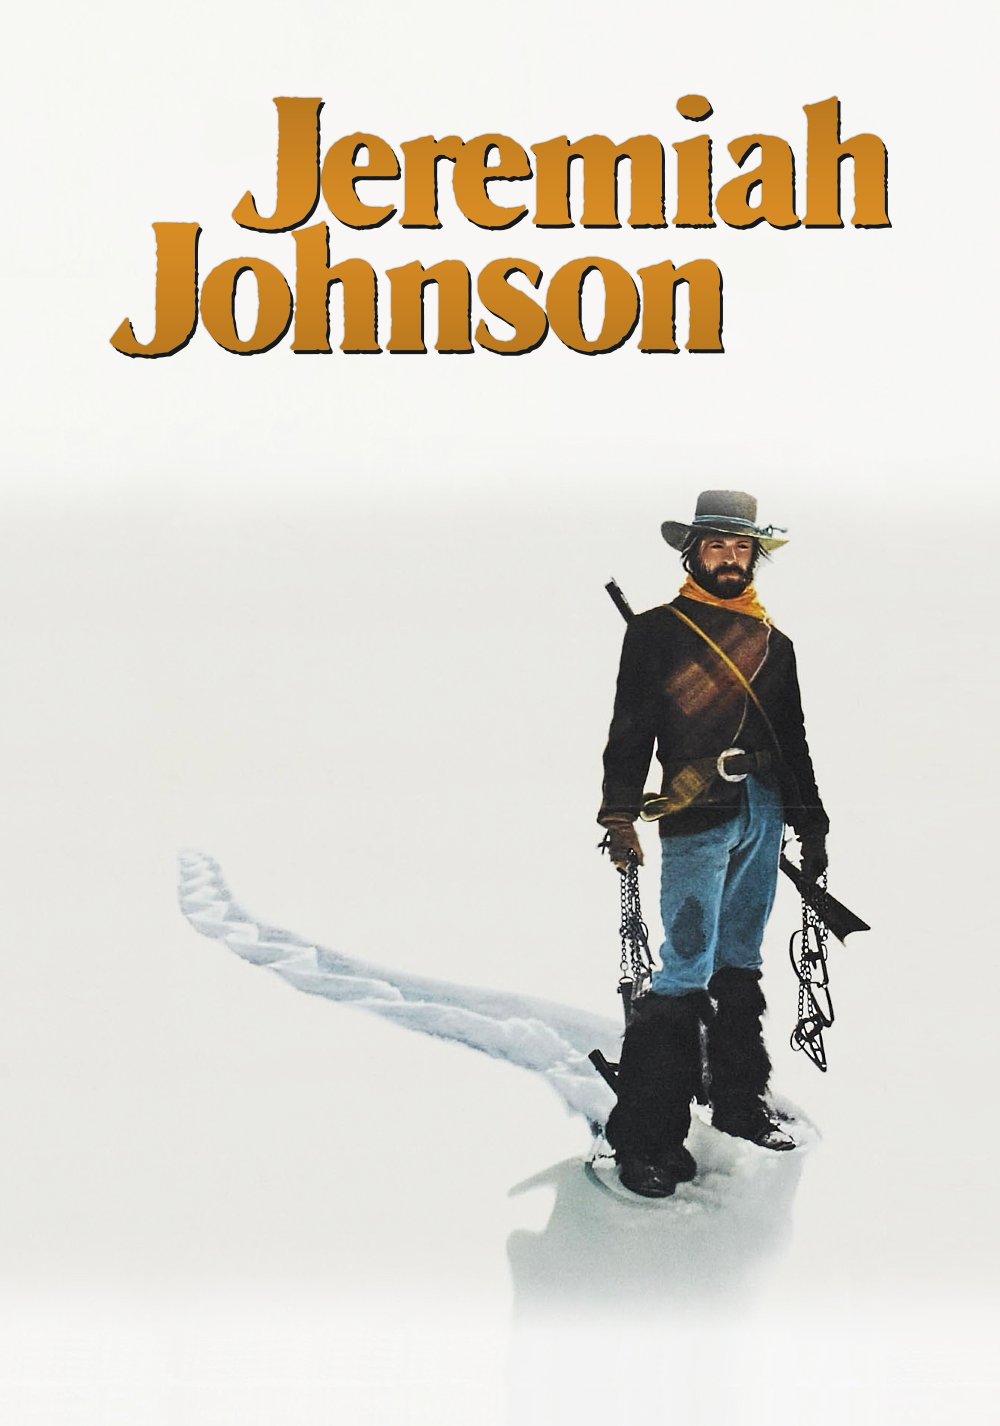 Jeremiah Johnson Picture   Image Abyss